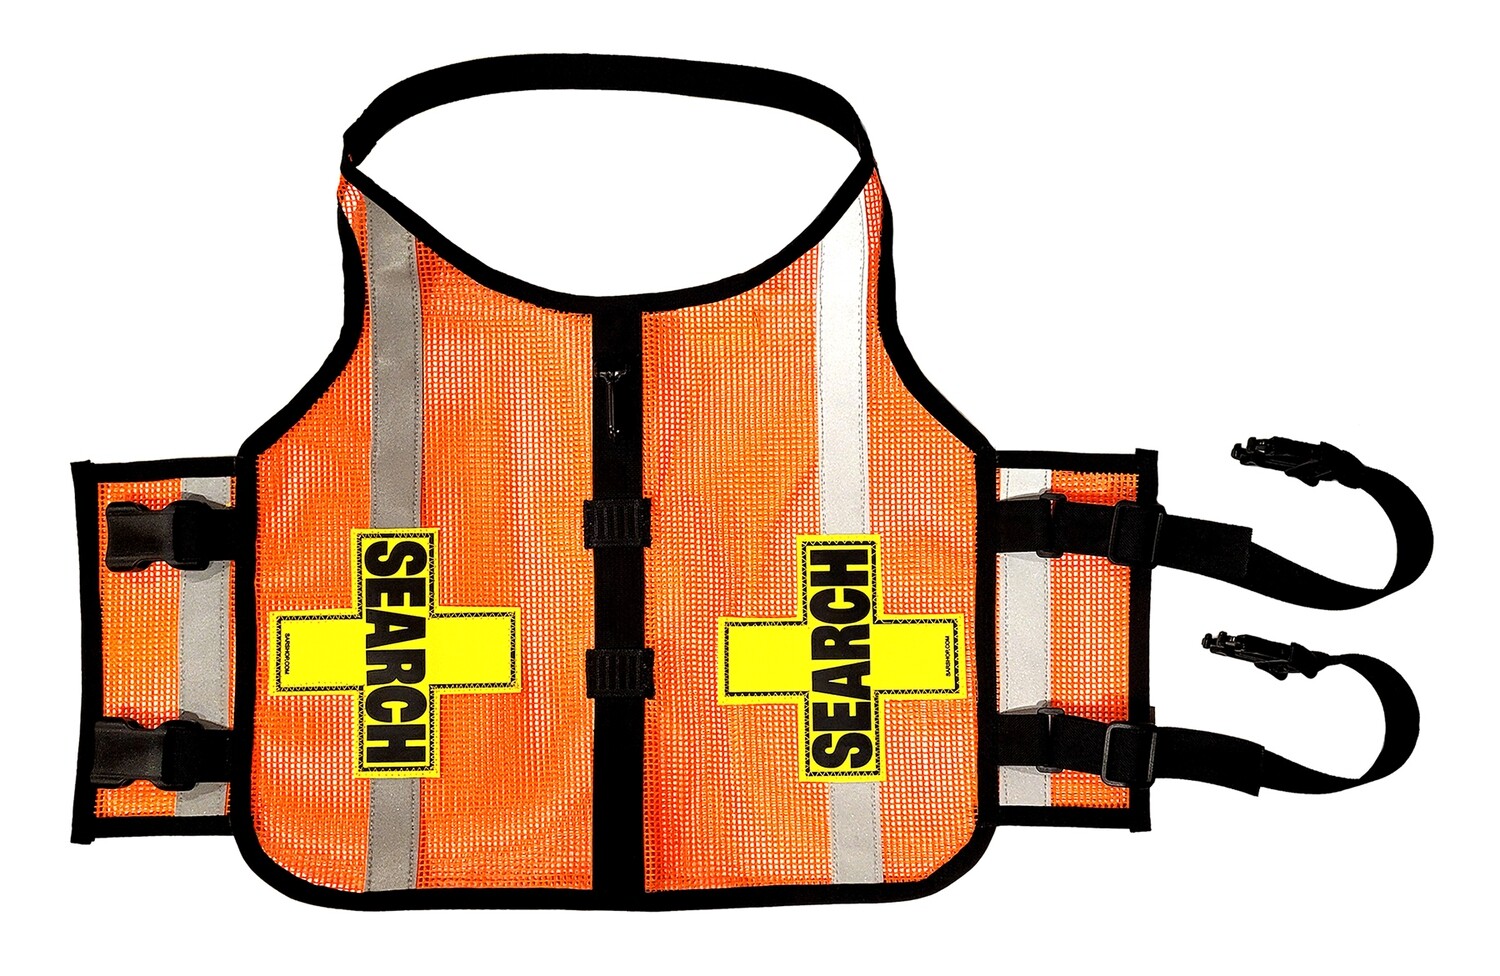 Standard K-9 Vest with Reflective Accents & Add-On Strip for Accessories (Light & Bell)